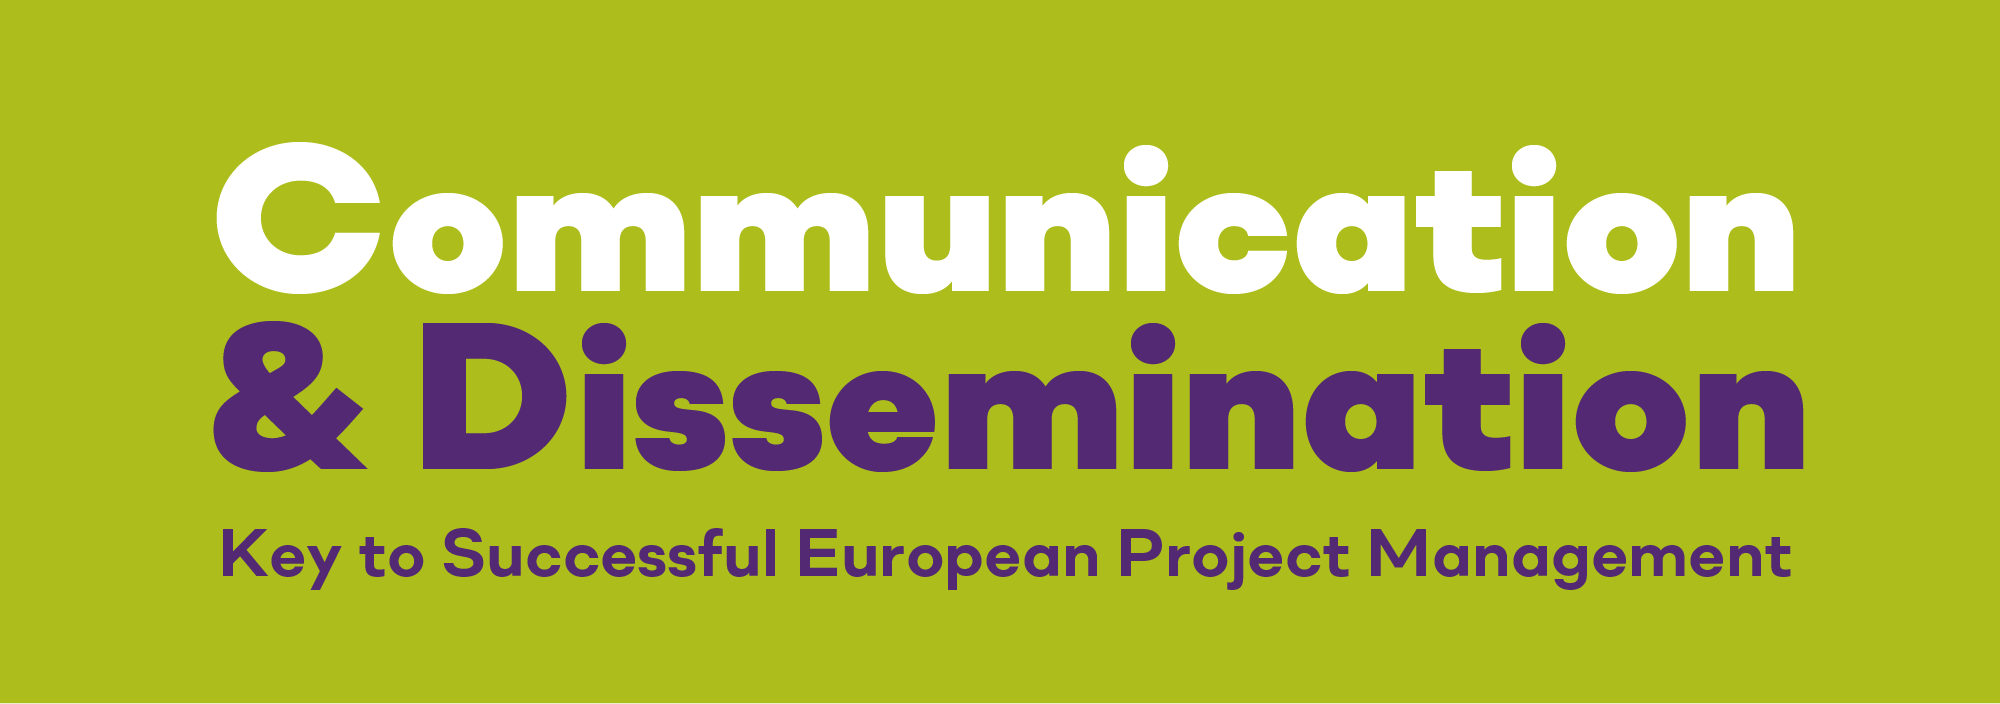 The Communication and Dissemination Plan in European Projects